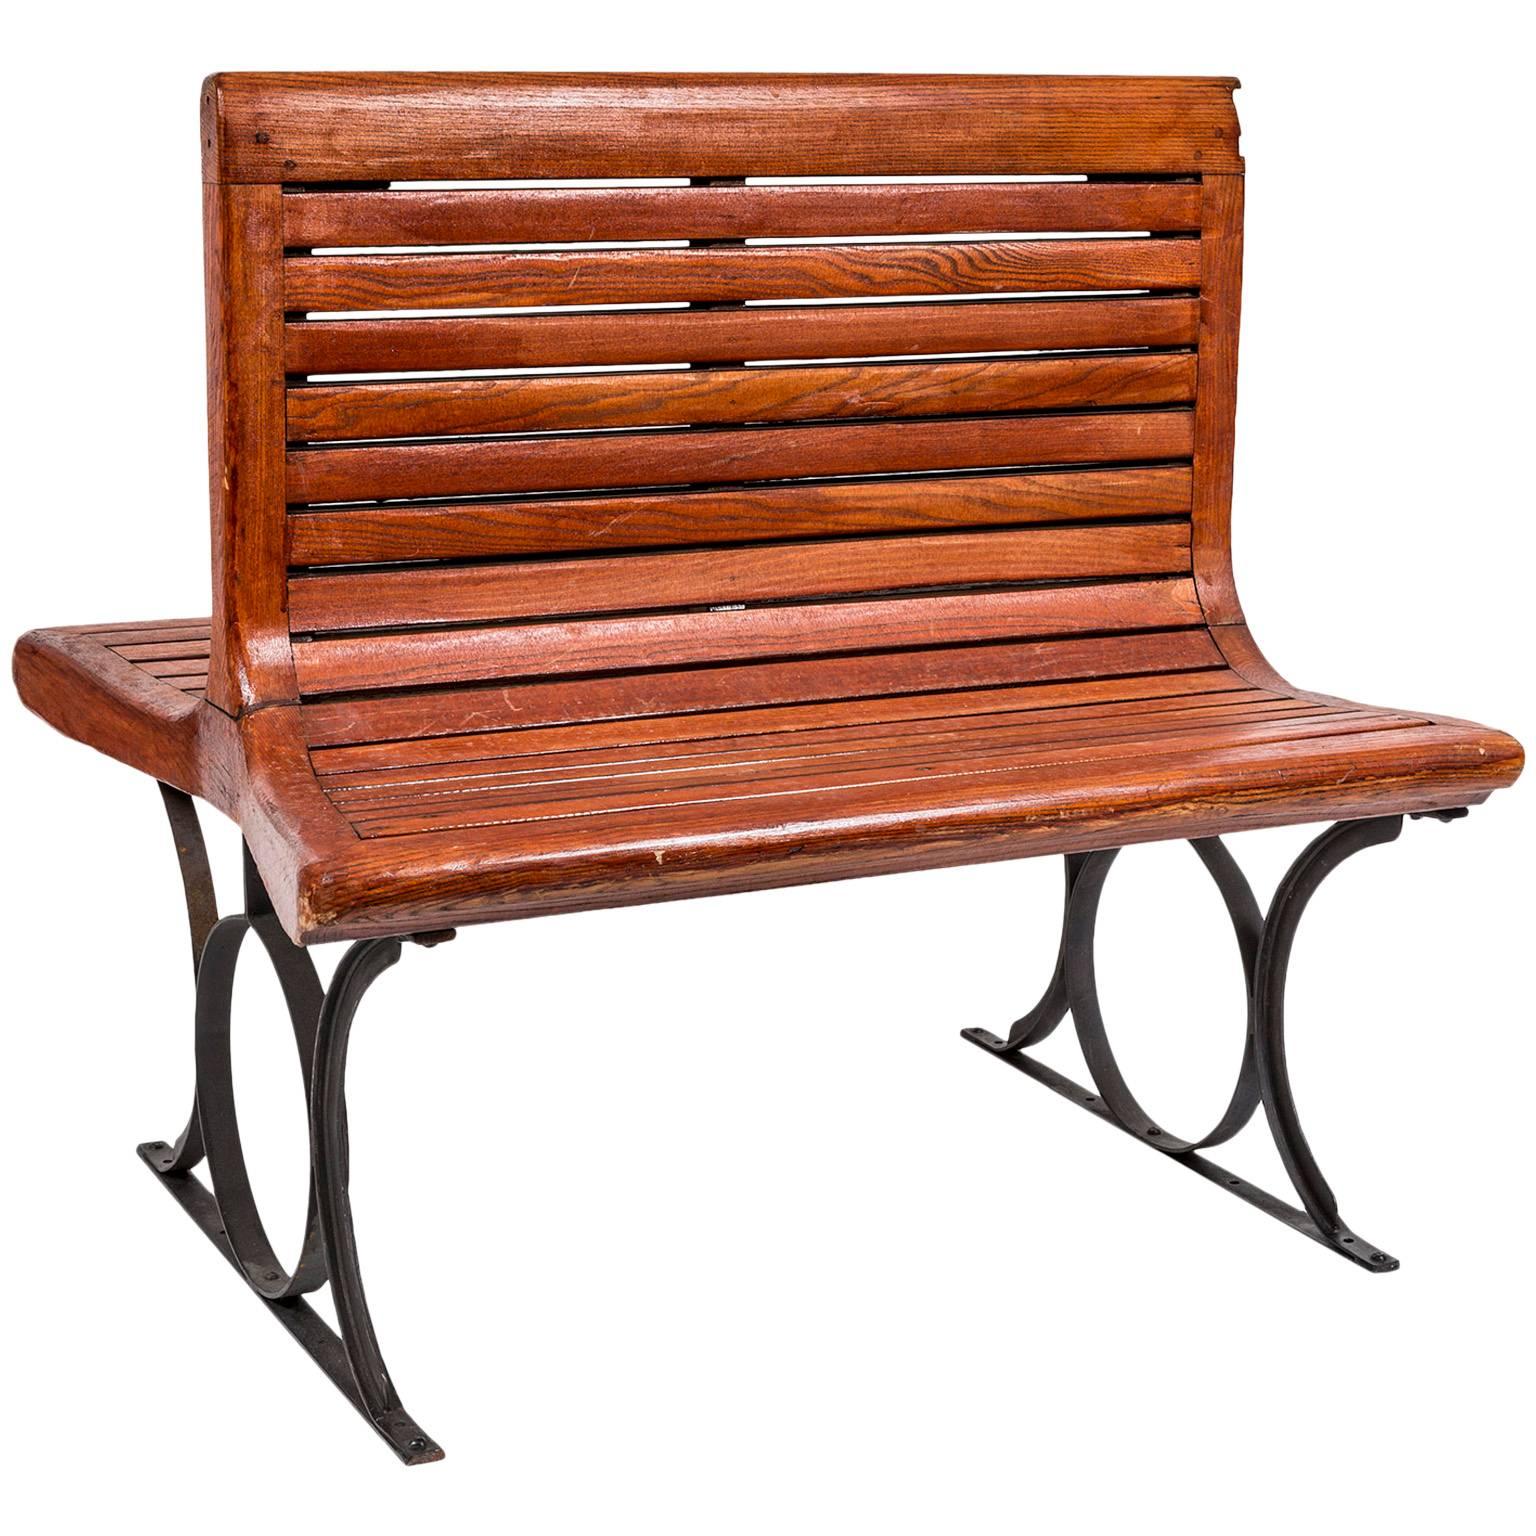 1920s French Paris Metro Second Class Double Sided Wooden Slatted Bench